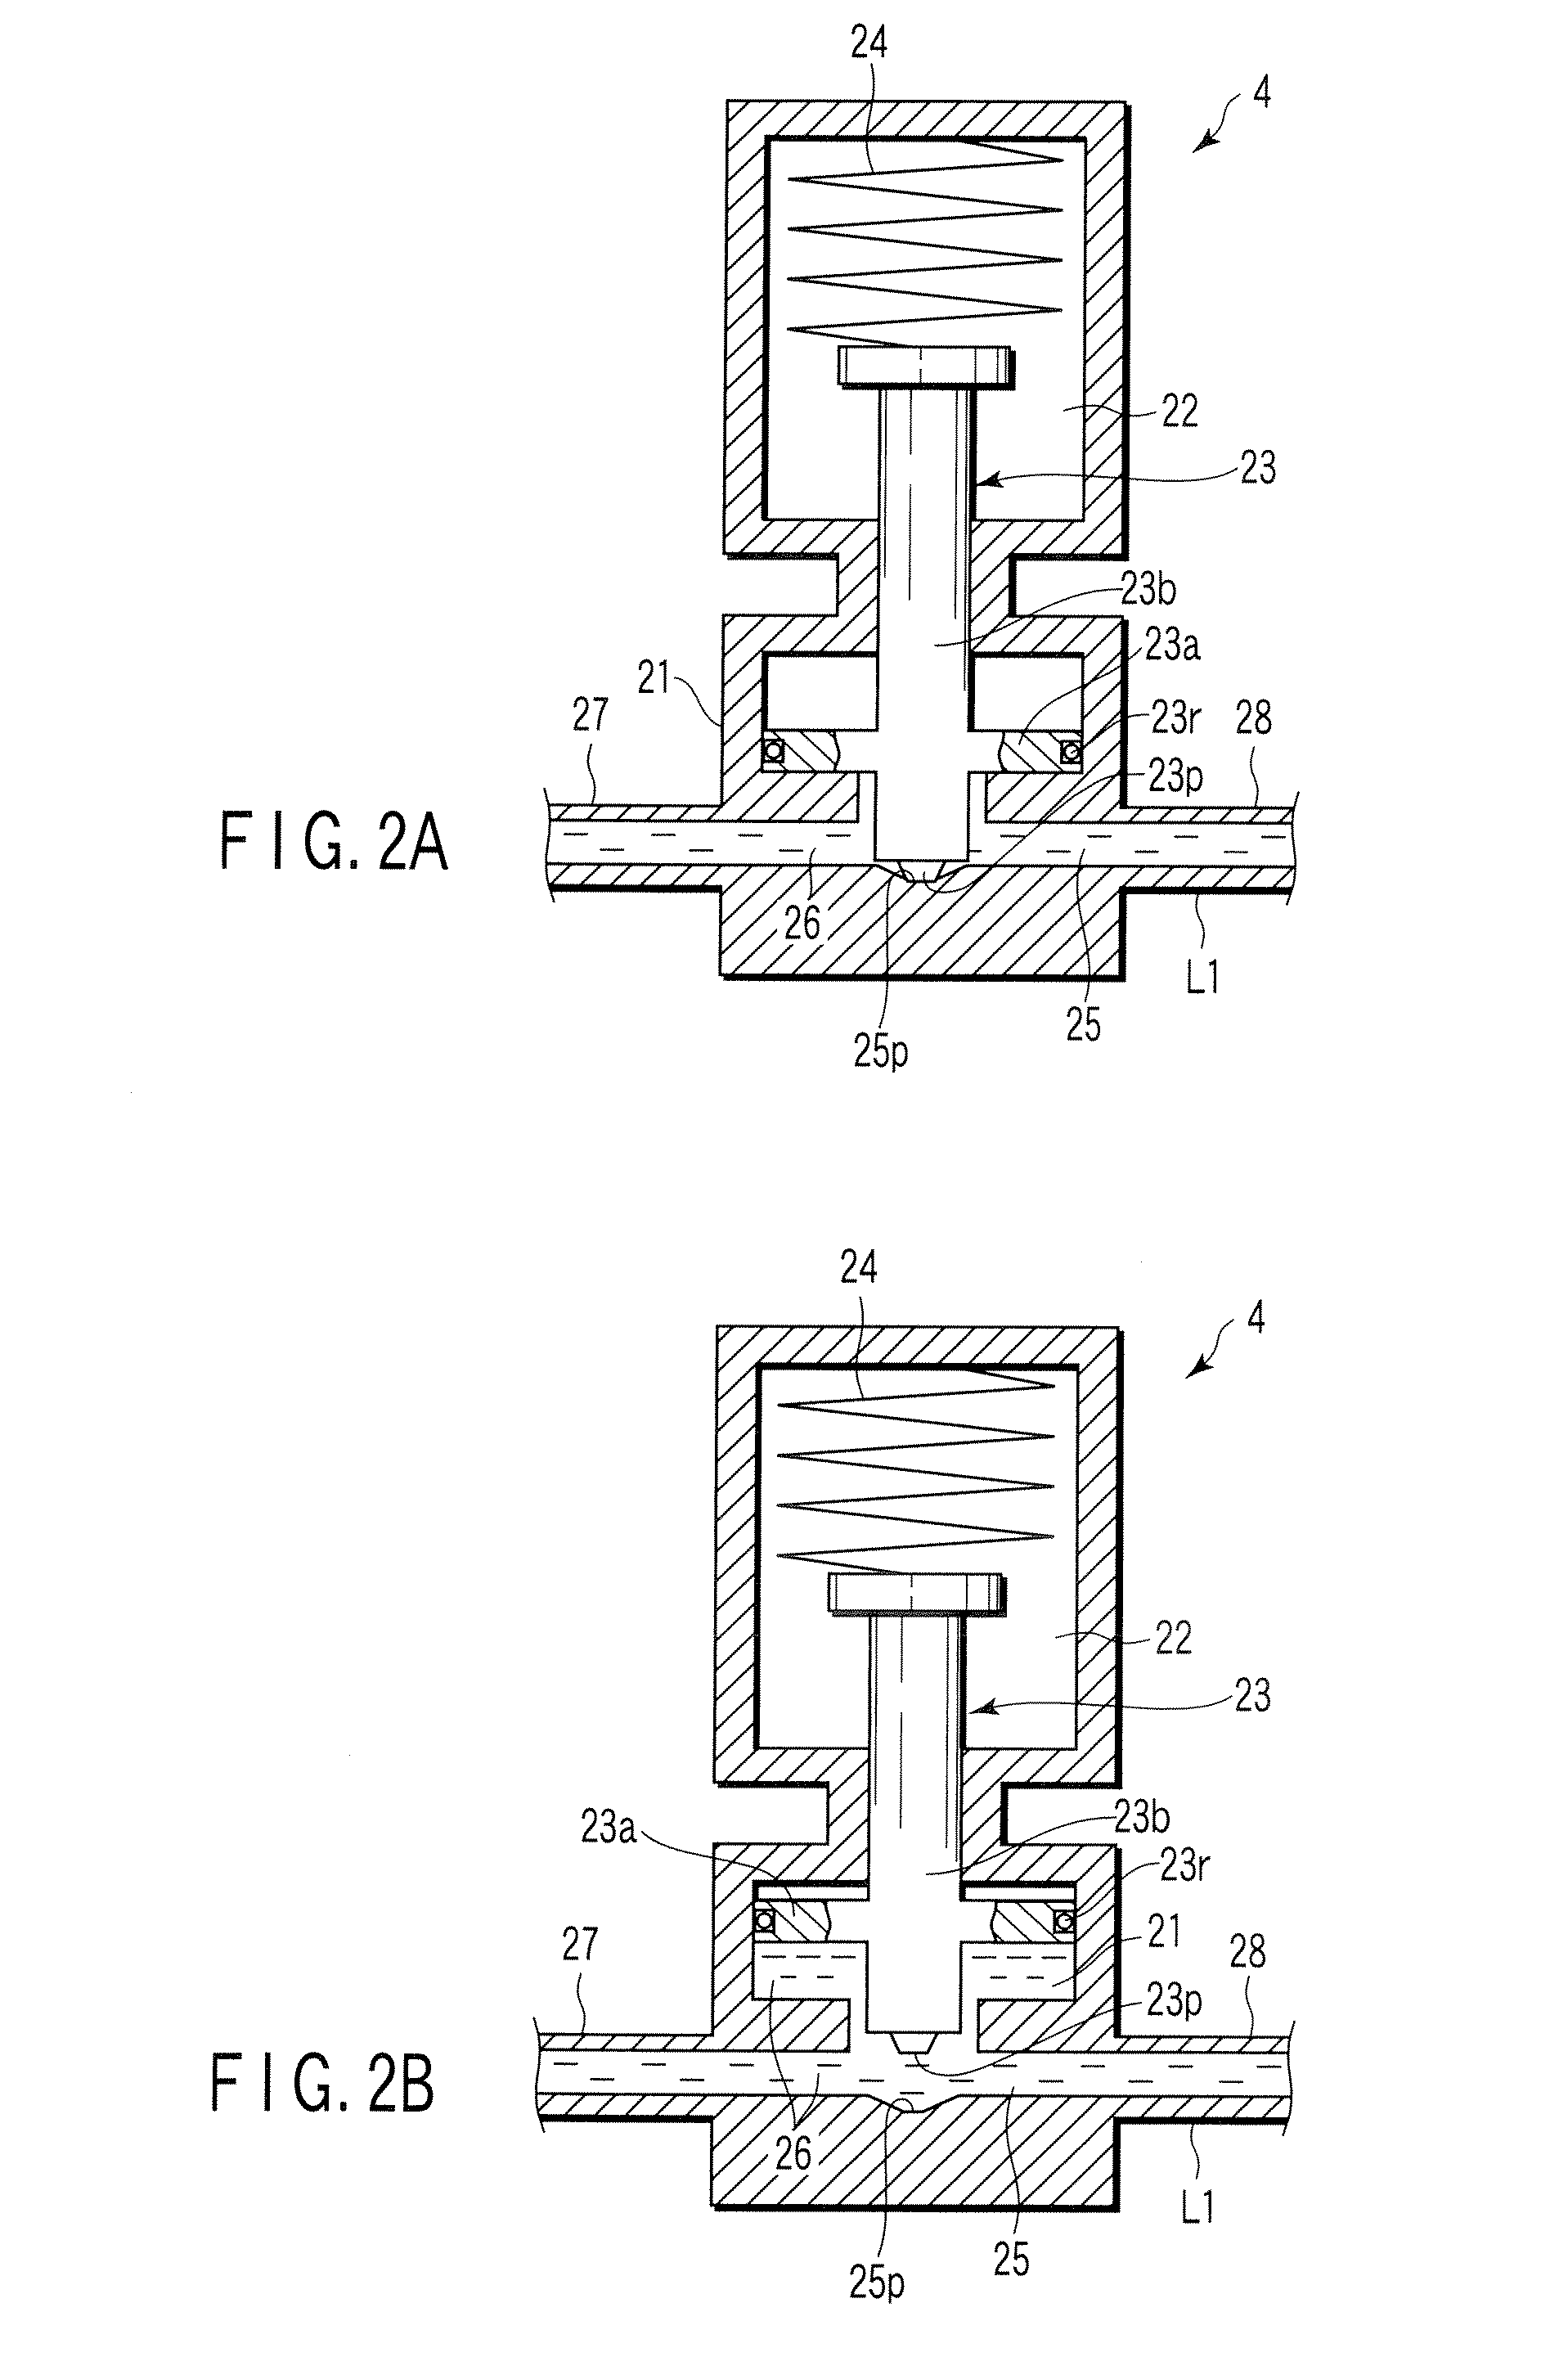 Chemical reactor and fuel cell system